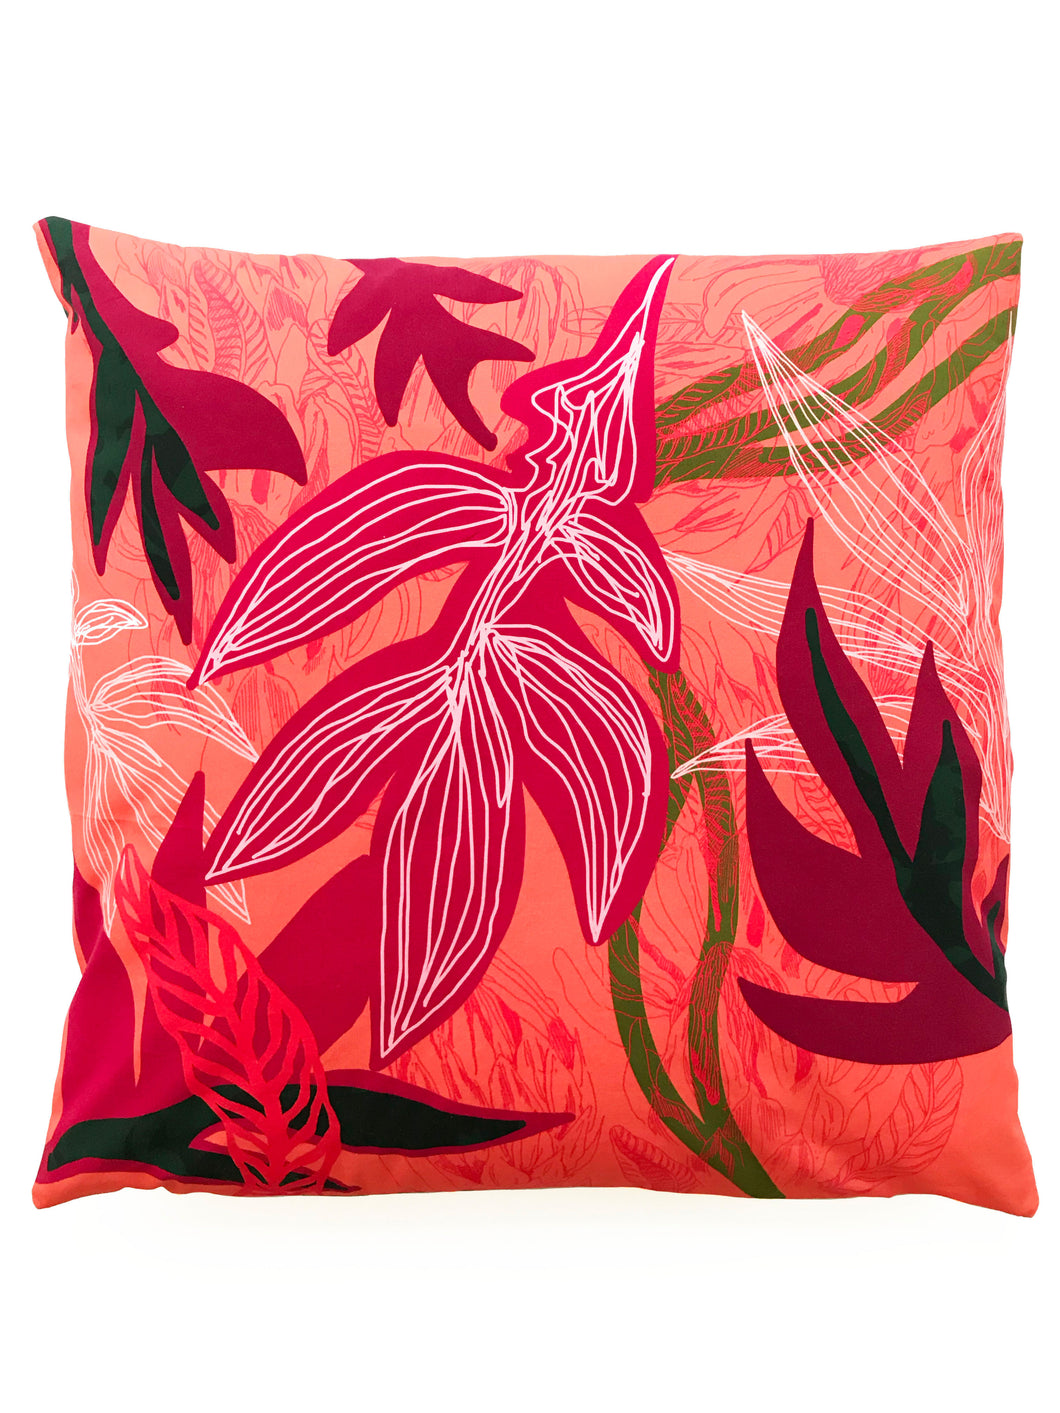 Statement Pink Leaves Cushion Cover